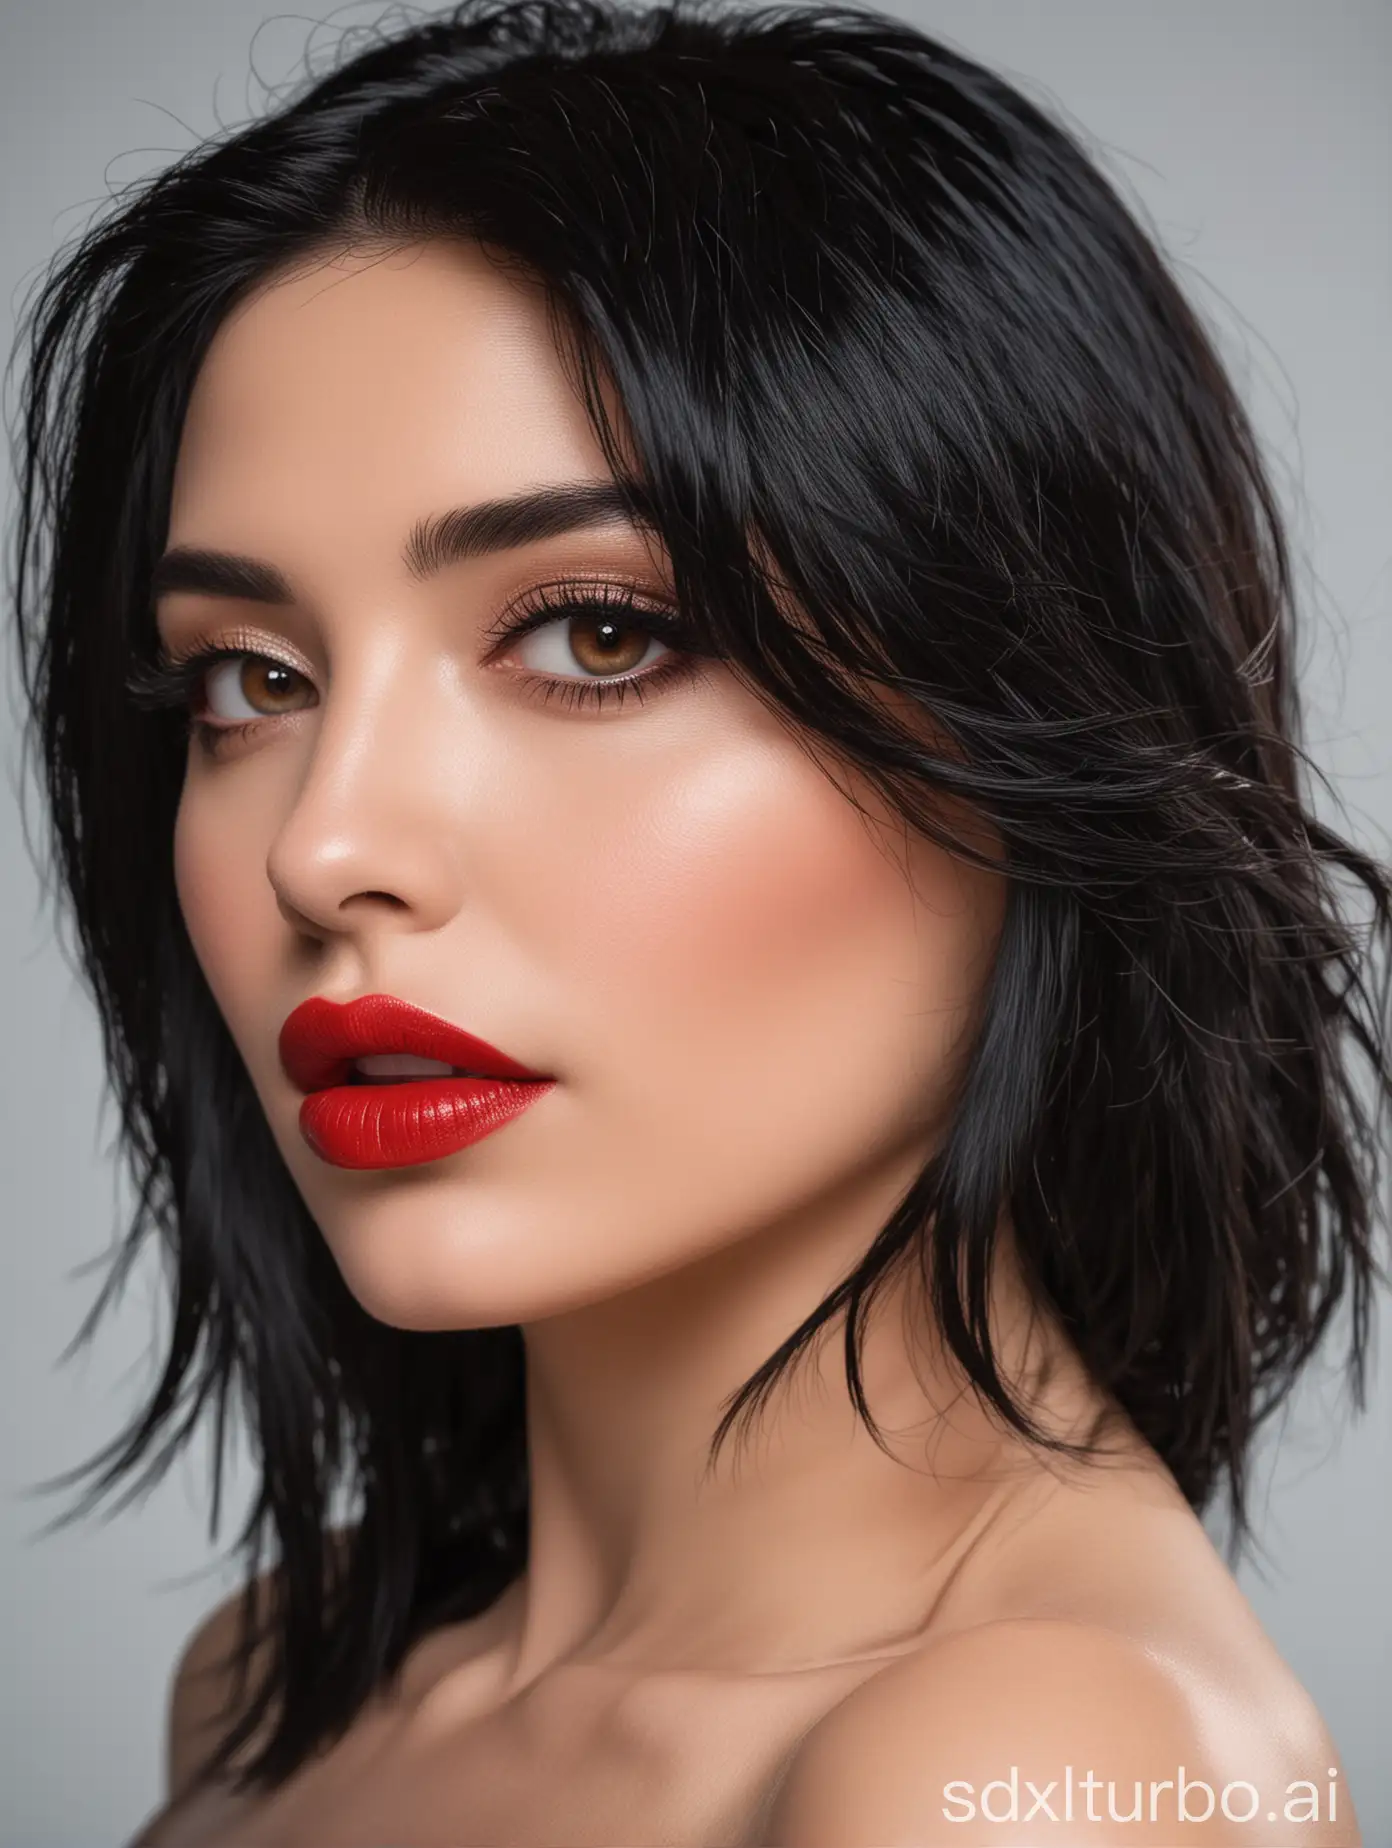 Side profile of a beautiful woman with black hair, red lips and blazing eyes